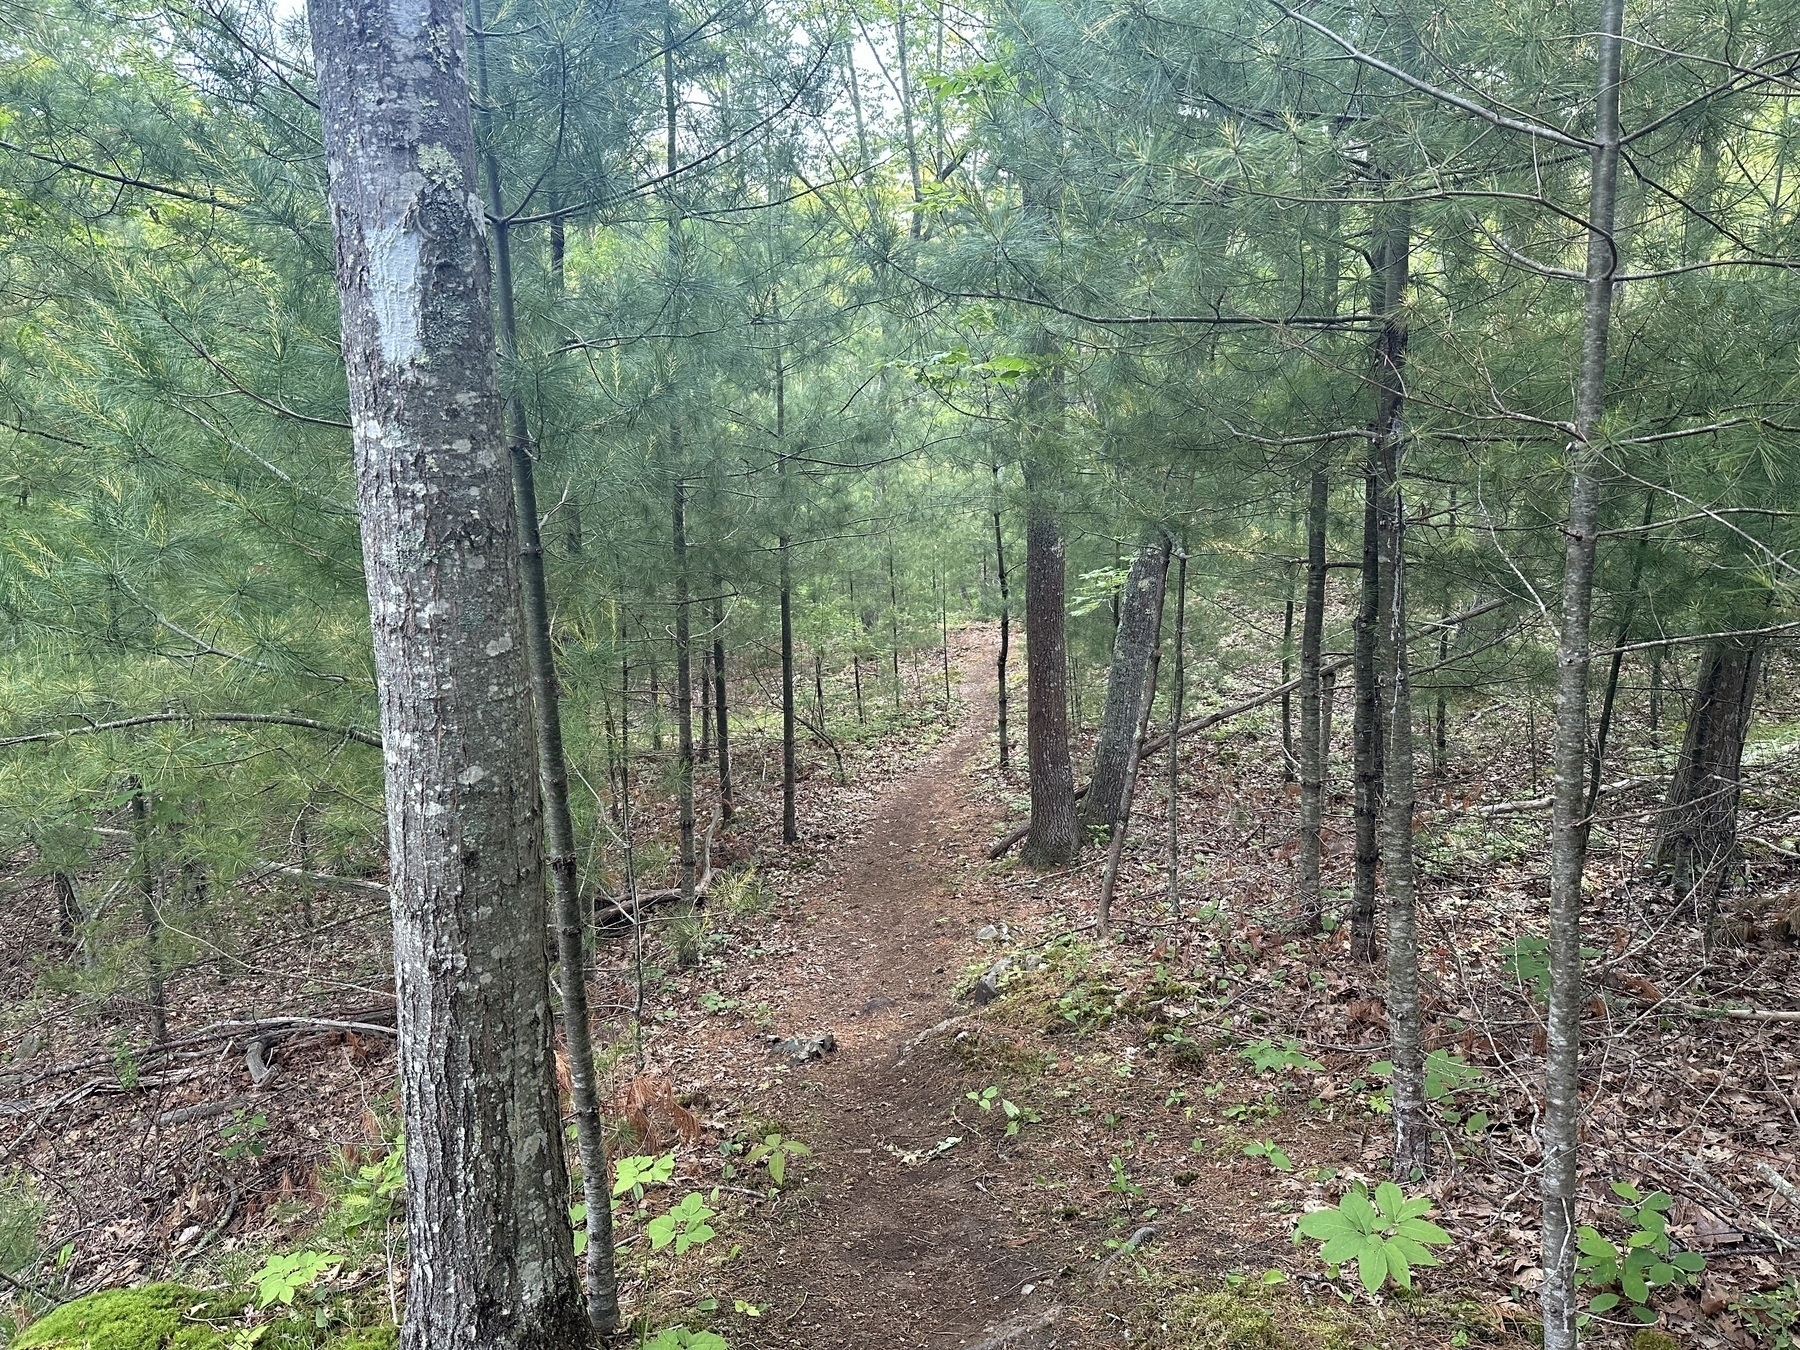 A dirt path winding through a dense forest filled with slender green trees and scattered underbrush.